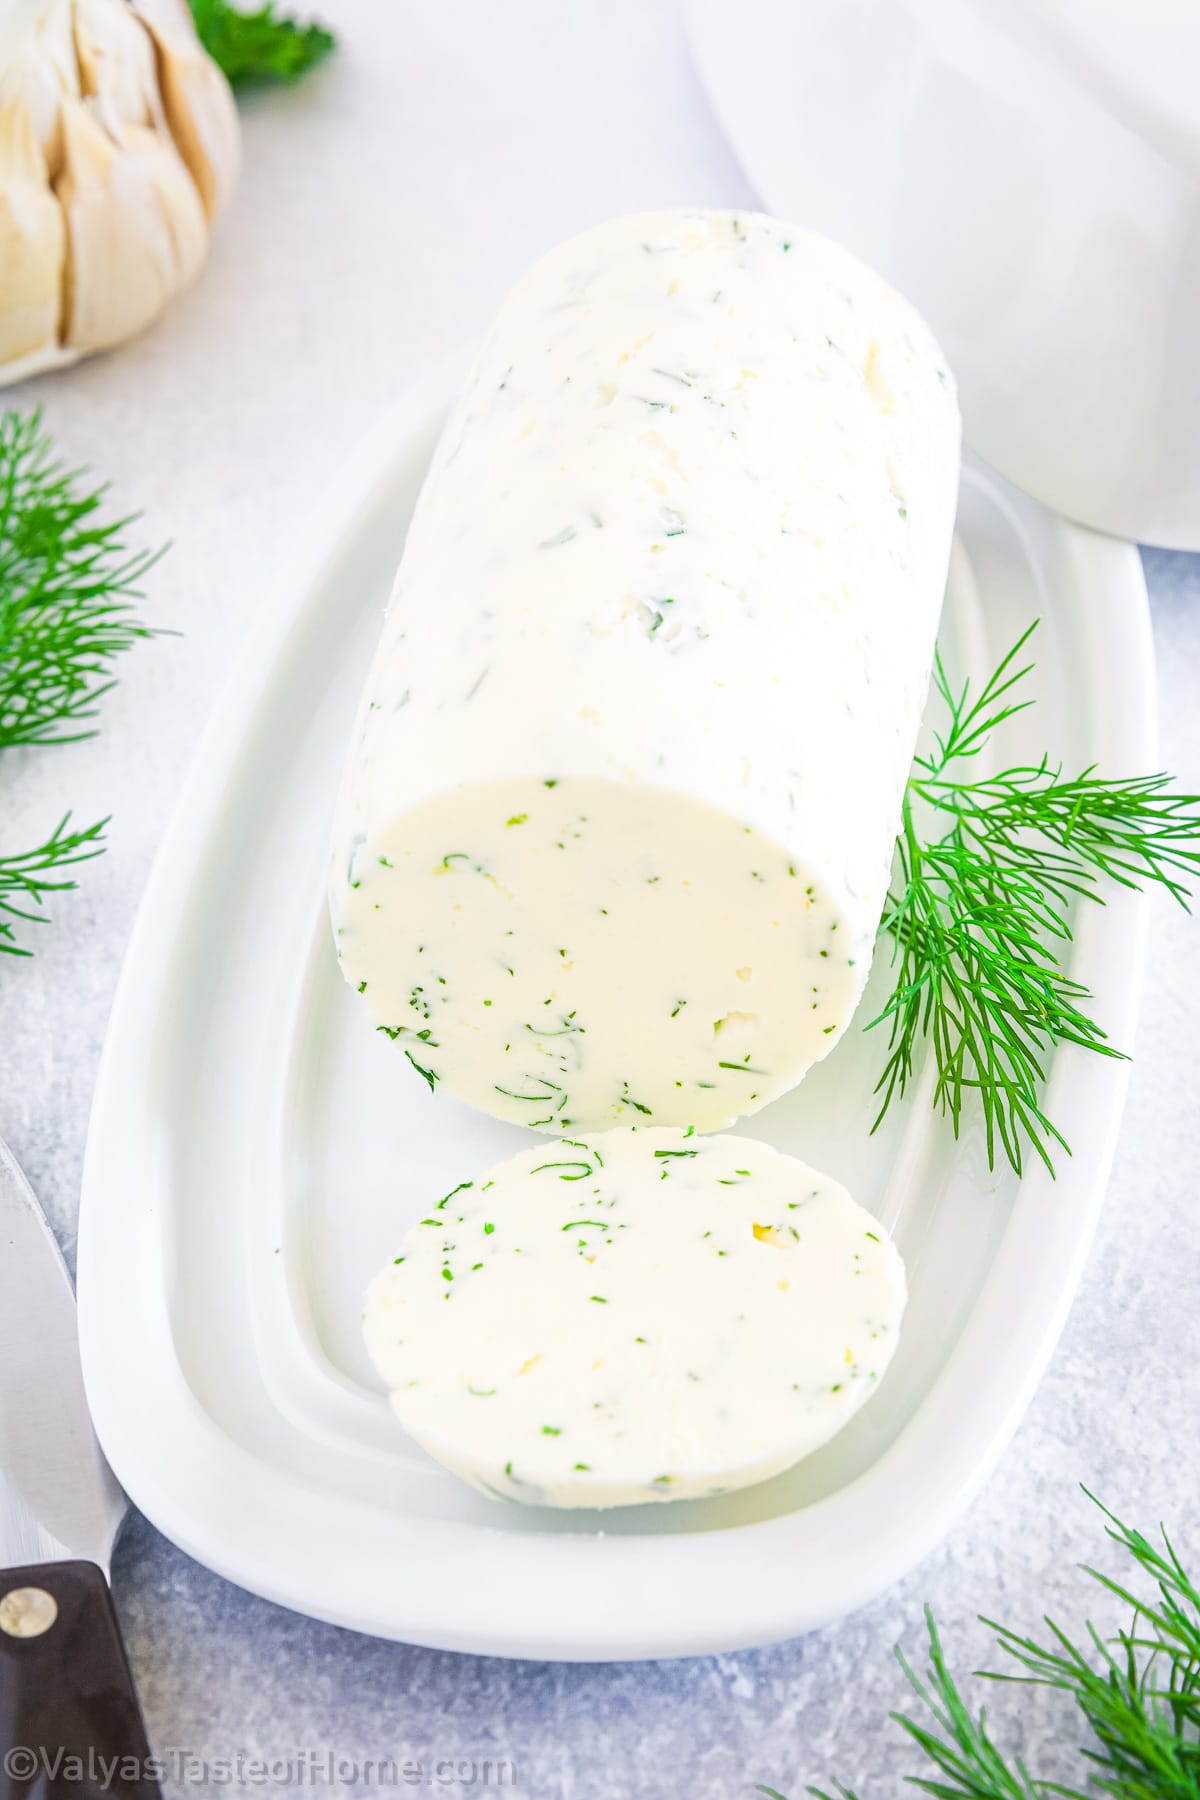 This homemade garlic butter is incredibly flavorful, and the taste is far superior to any store-bought version.